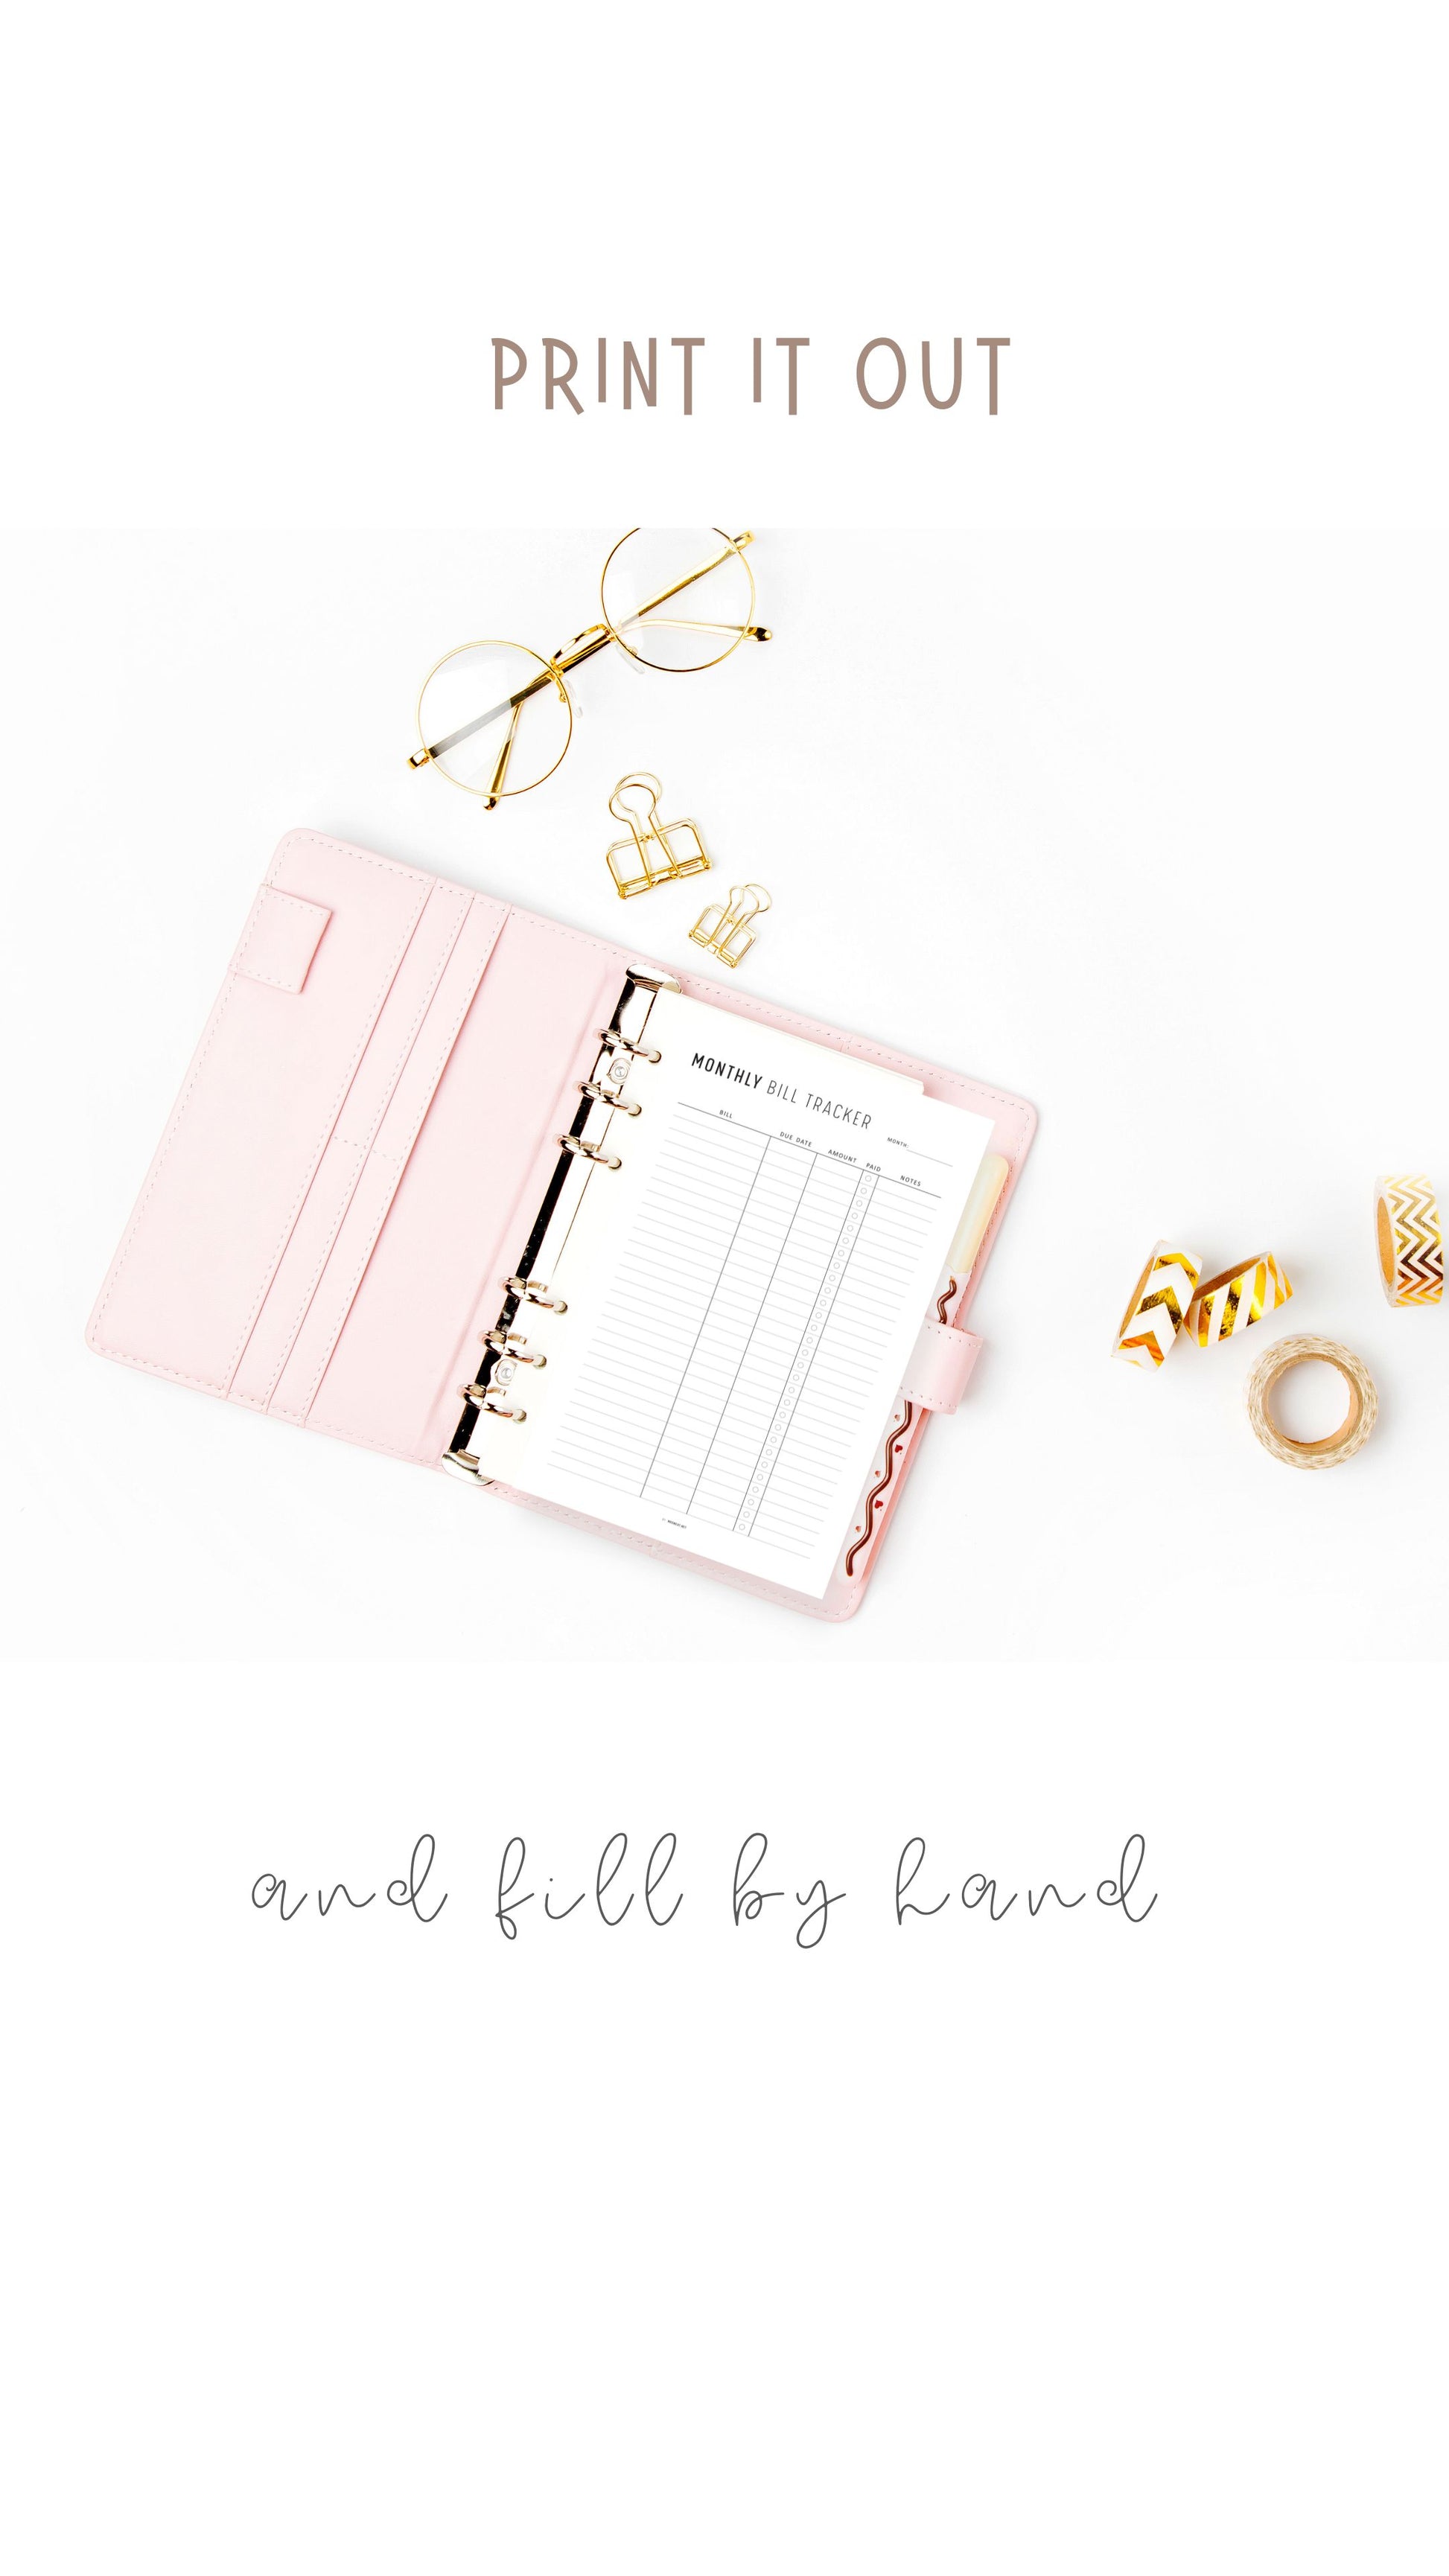 Monthly Bill Payment Tracker Template Printable, Minimalist Version, Colorful Version, A4, A5, Letter, Half Letter, Digital Monthly Budget Planner, Spending Tracker Template